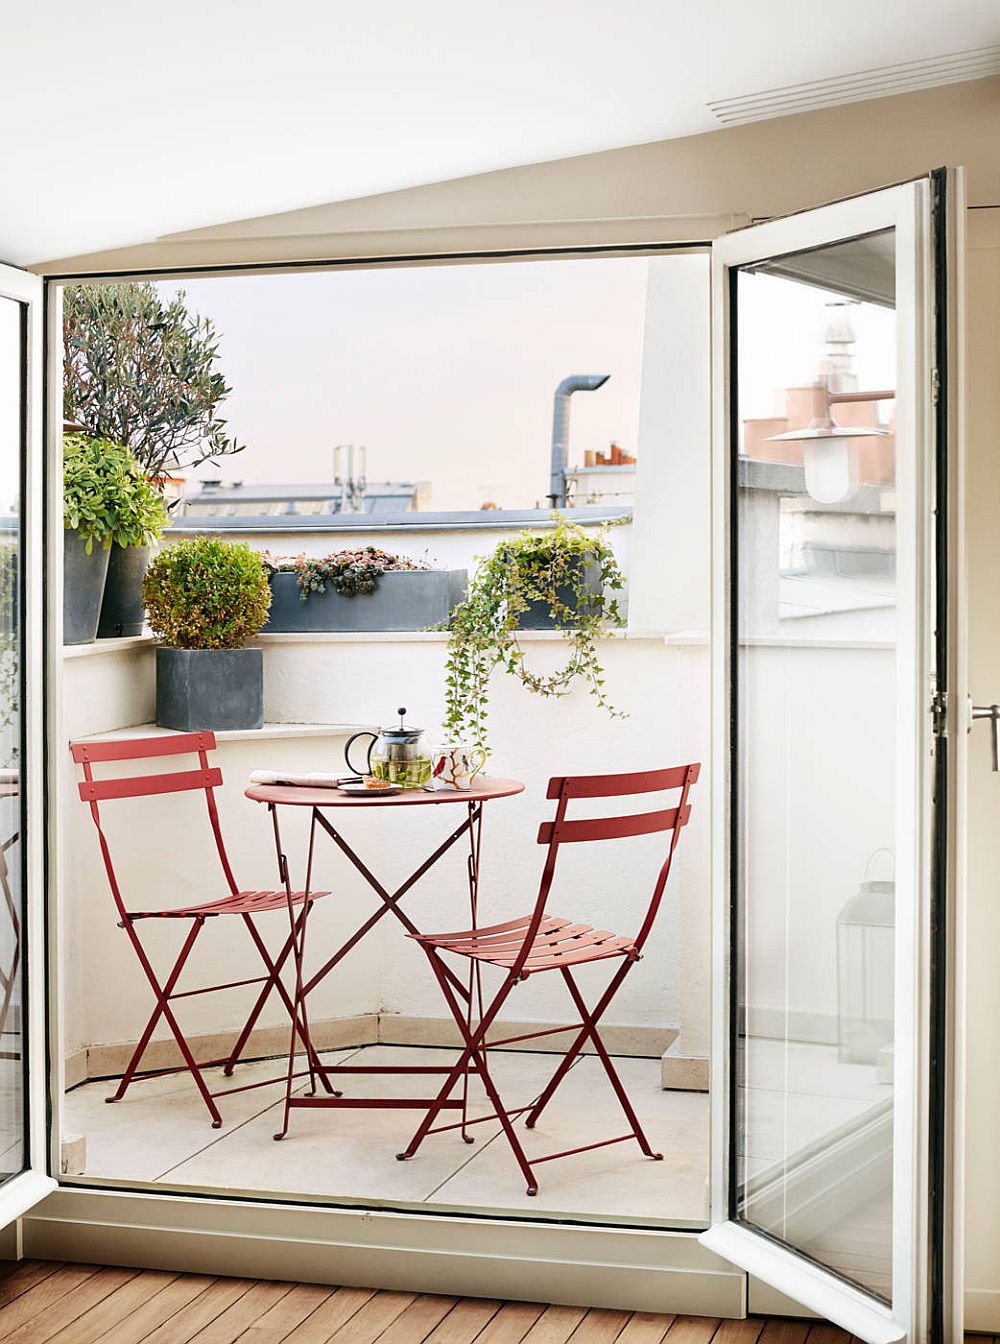 Slim-table-and-chairs-in-red-for-the-tiny-Balcony-of-Paris-home-67648